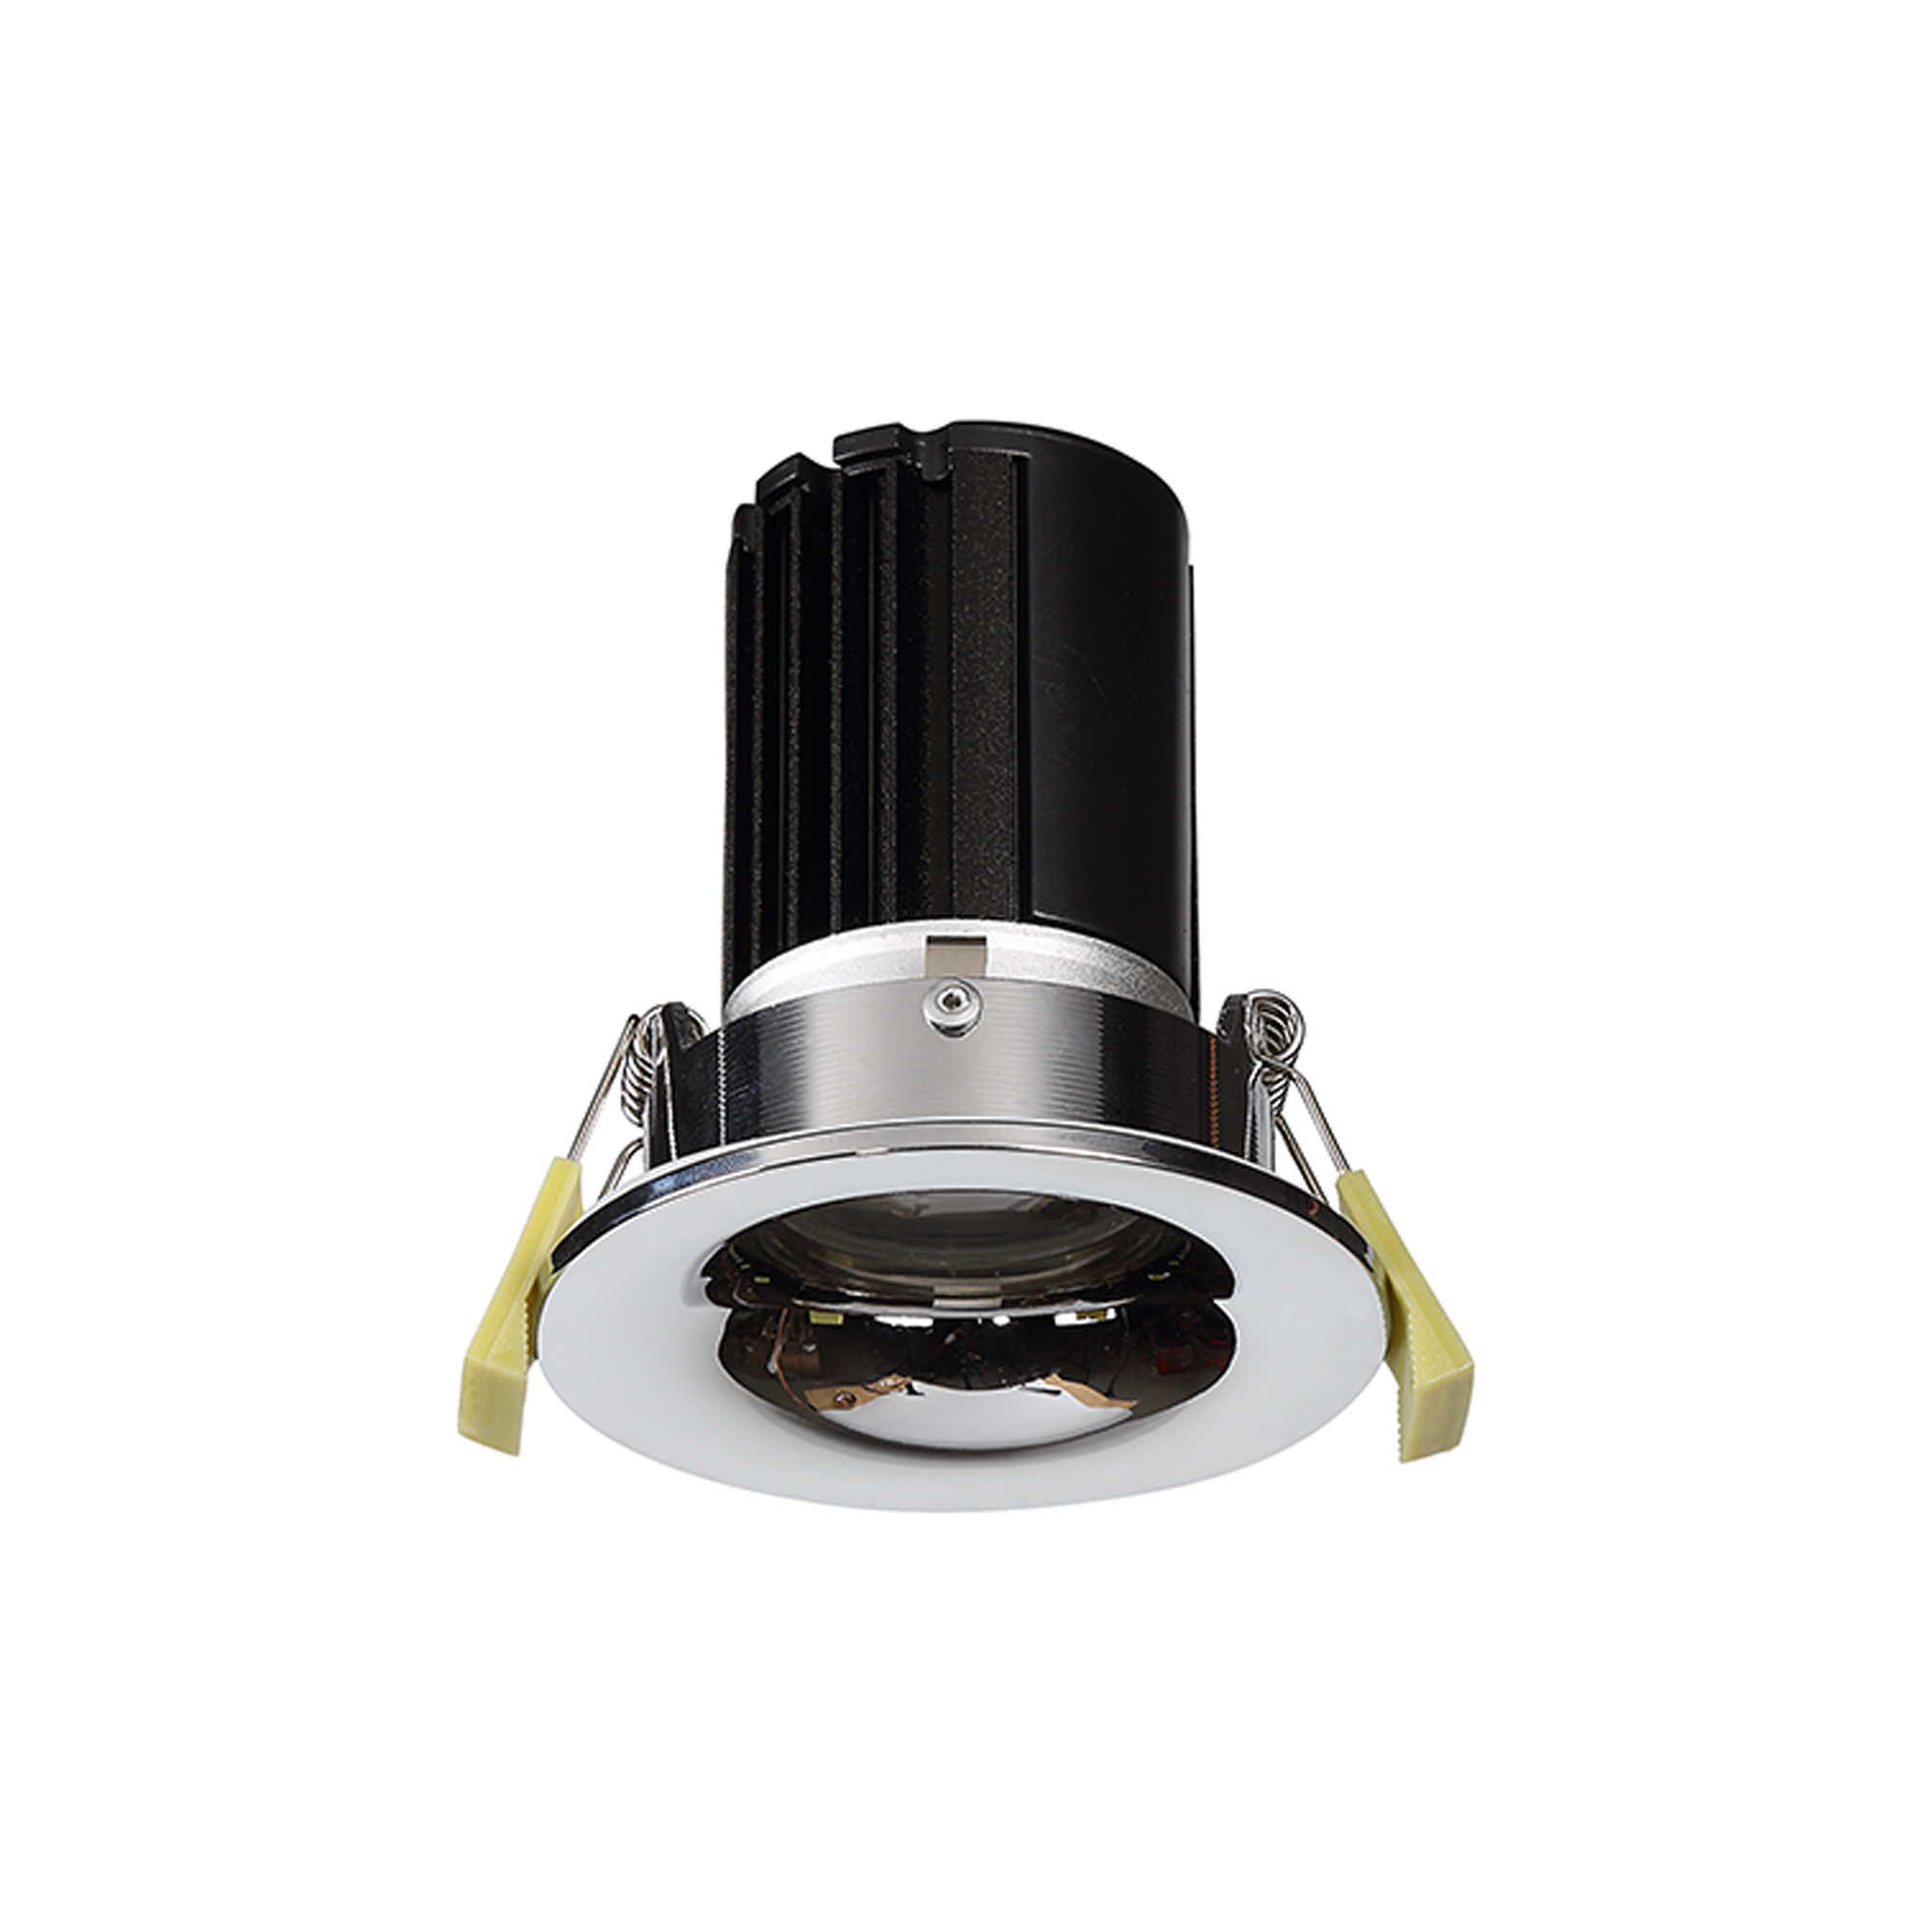 DM201538  Bruve 12 Tridonic powered 12W 2700K 1200lm 12° LED Engine,350mA , CRI>90 LED Engine Polished Chrome Fixed Round Recessed Downlight, Inner Glass cover, IP65